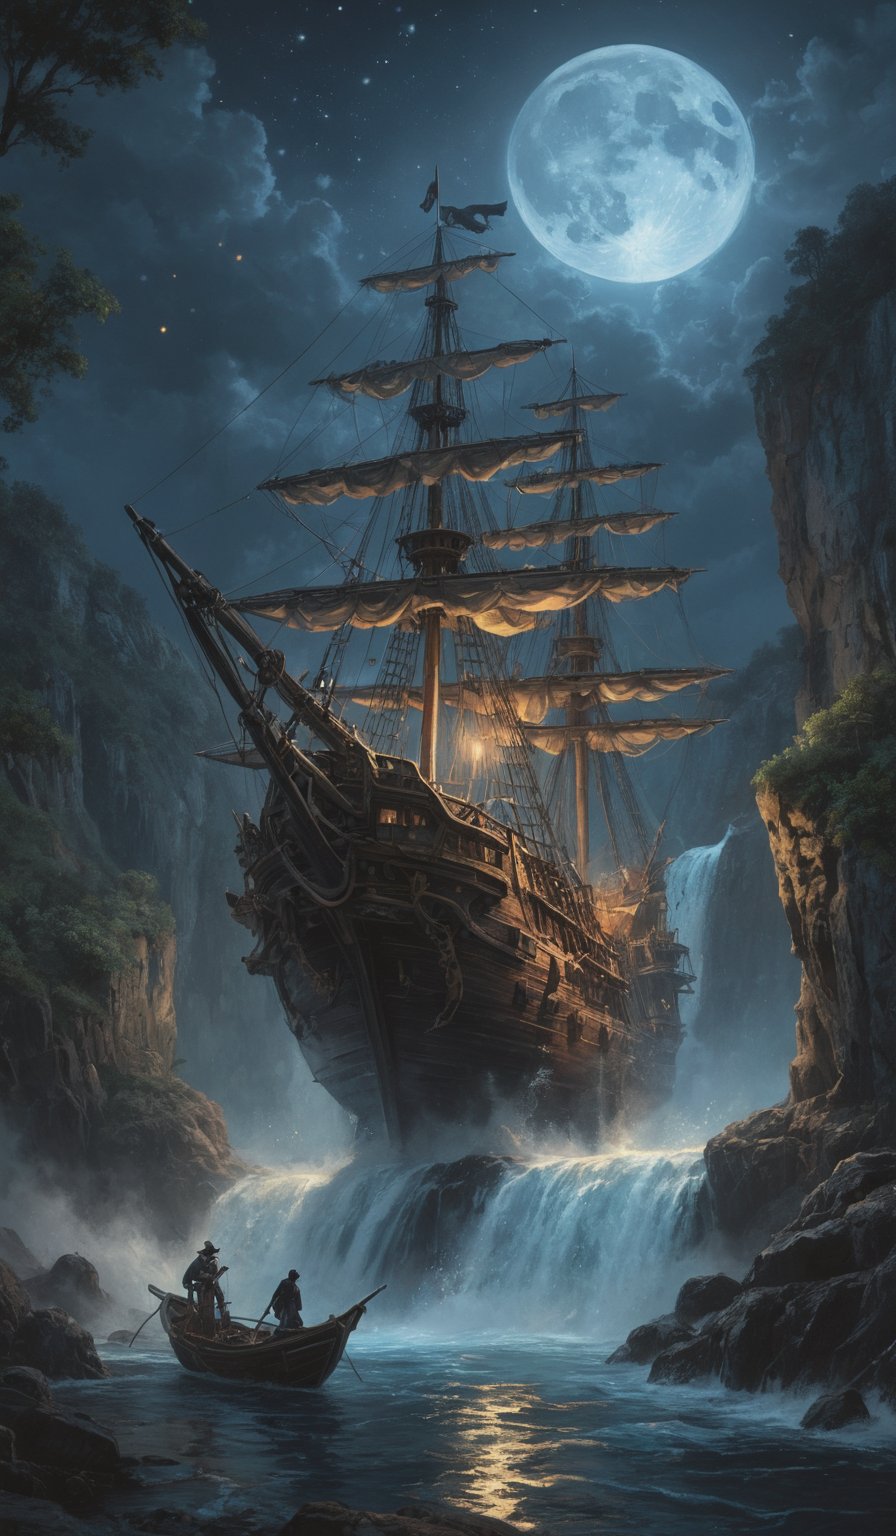 A dreamlike landscape bathed in the soft glow of a blue moon and stars, where a ghostly pirate ship teeters precariously at the edge of a high waterfall. The scene is set against a backdrop of dark night, with thick brushstrokes characteristic of oil painting techniques used to create a sense of depth and texture. The composition is masterfully crafted, with elements of high contrast and brilliant design guiding the viewer's eye through the intricate details. Oil on canvas, 12k resolution, capturing the essence of romantic impressionism.